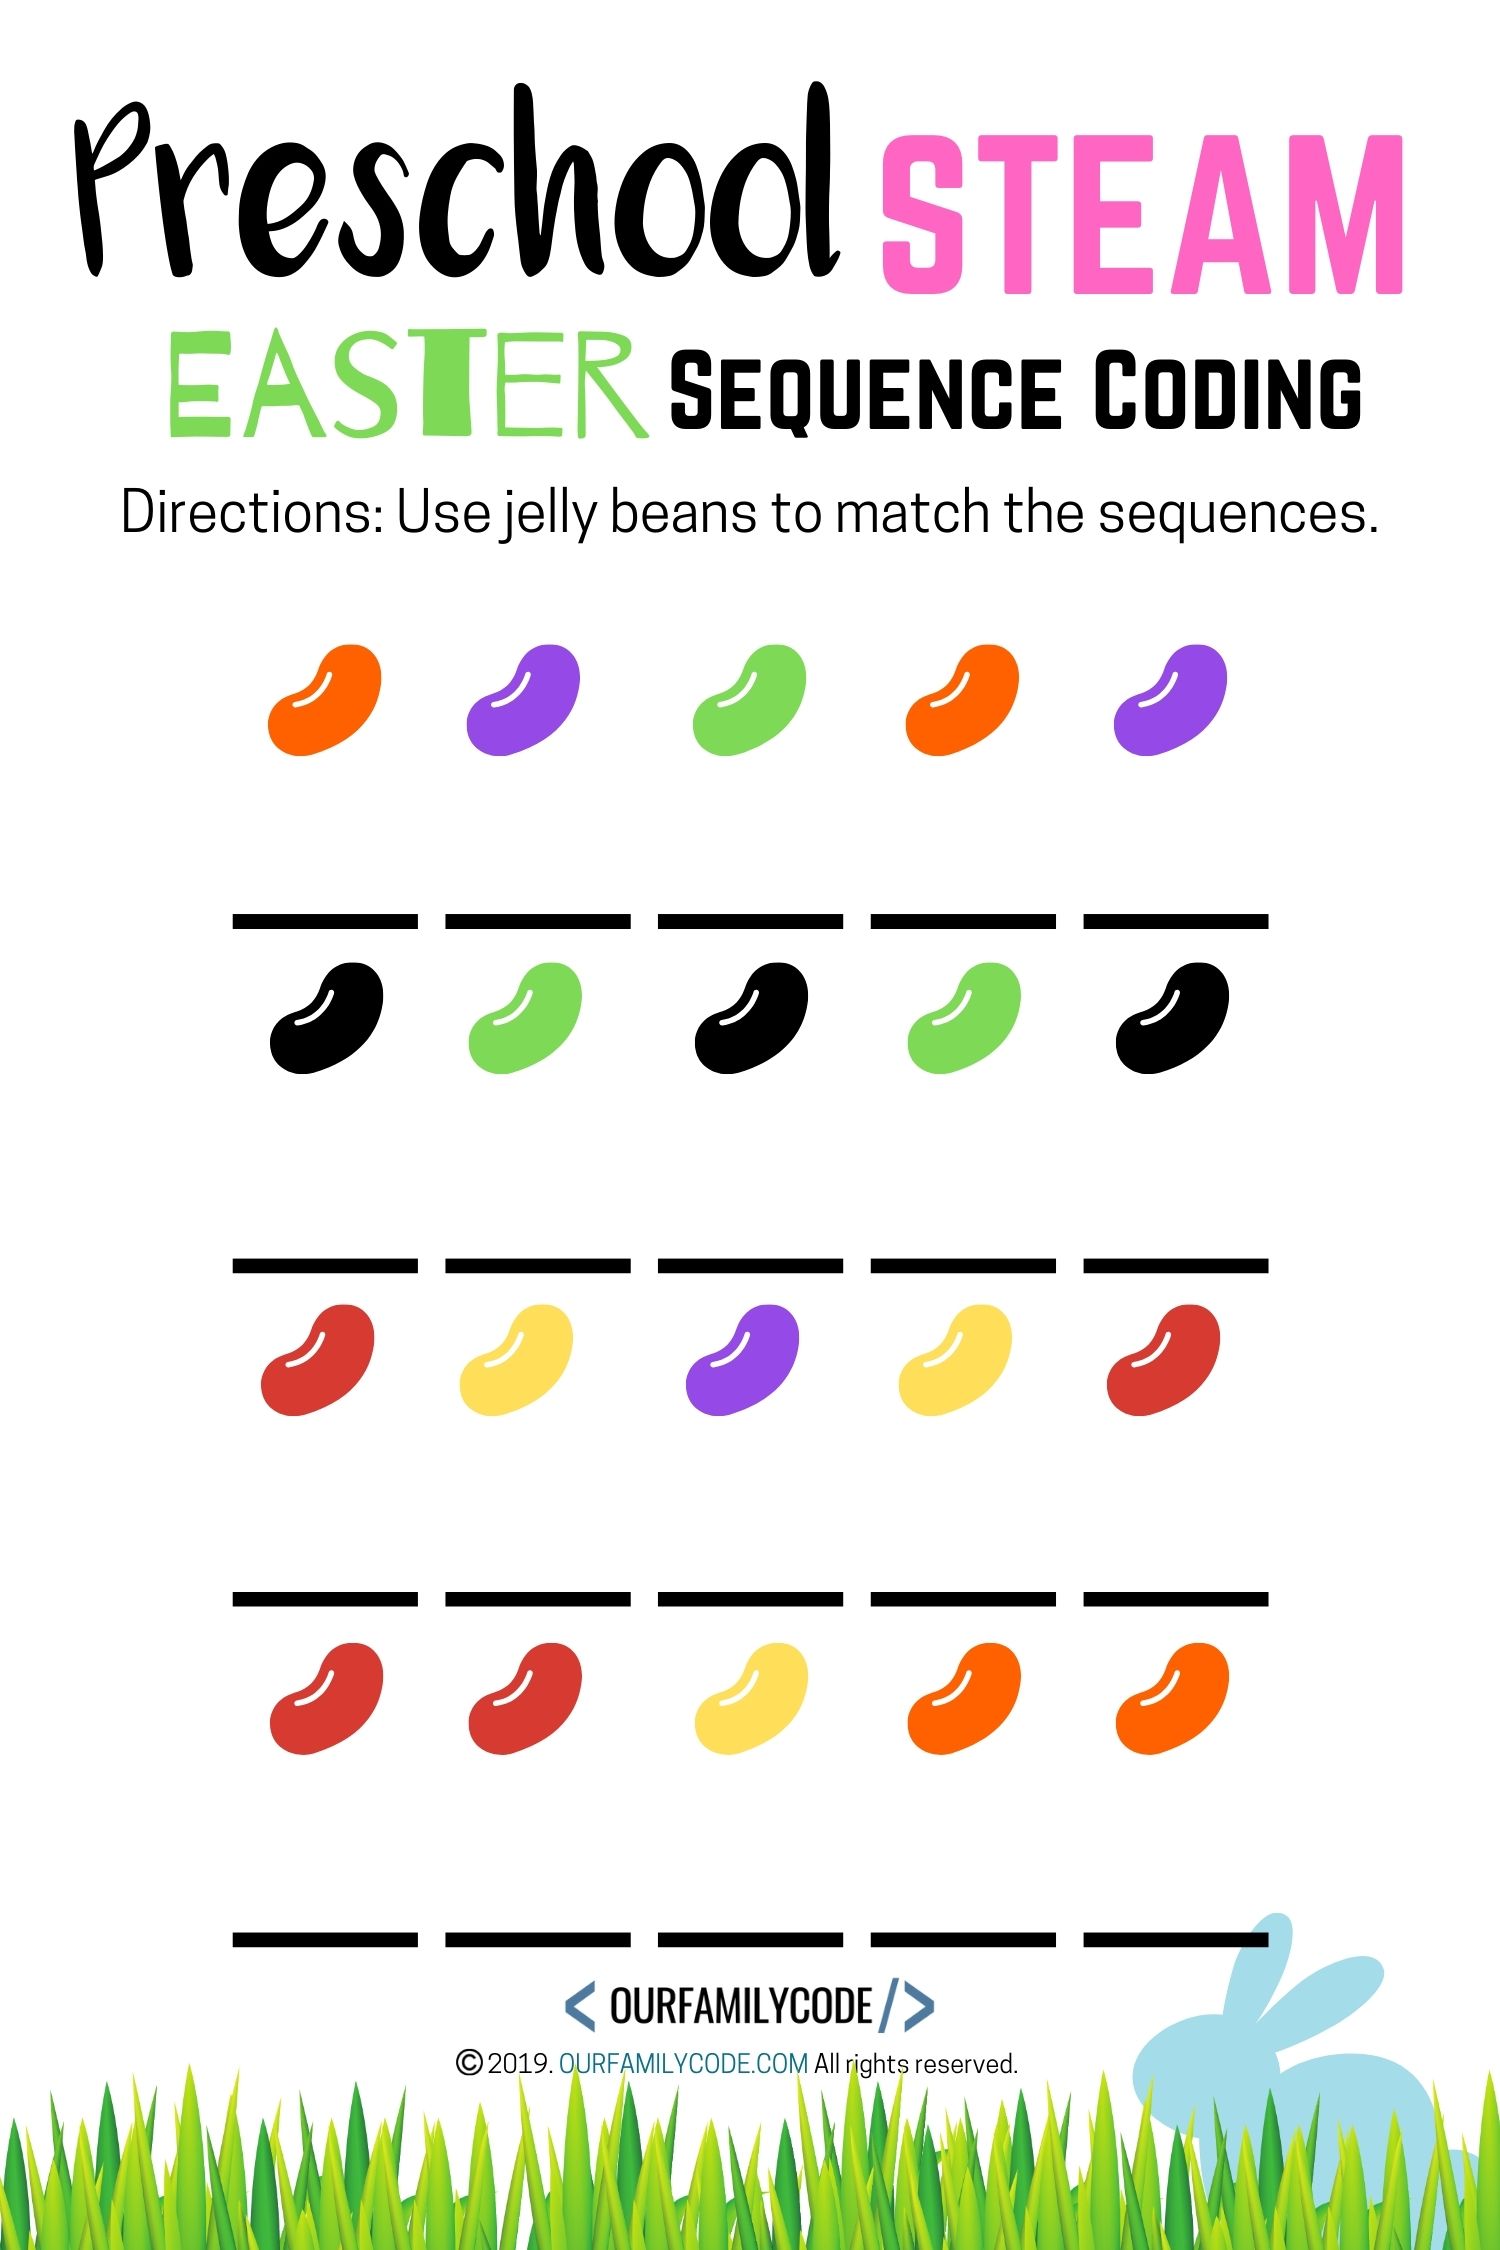 Grab these free preschool STEAM Easter sequence coding worksheets to practice sequencing today and finish writing sequences with jelly beans! #coding #teachkidstocode #STEAM #STEM